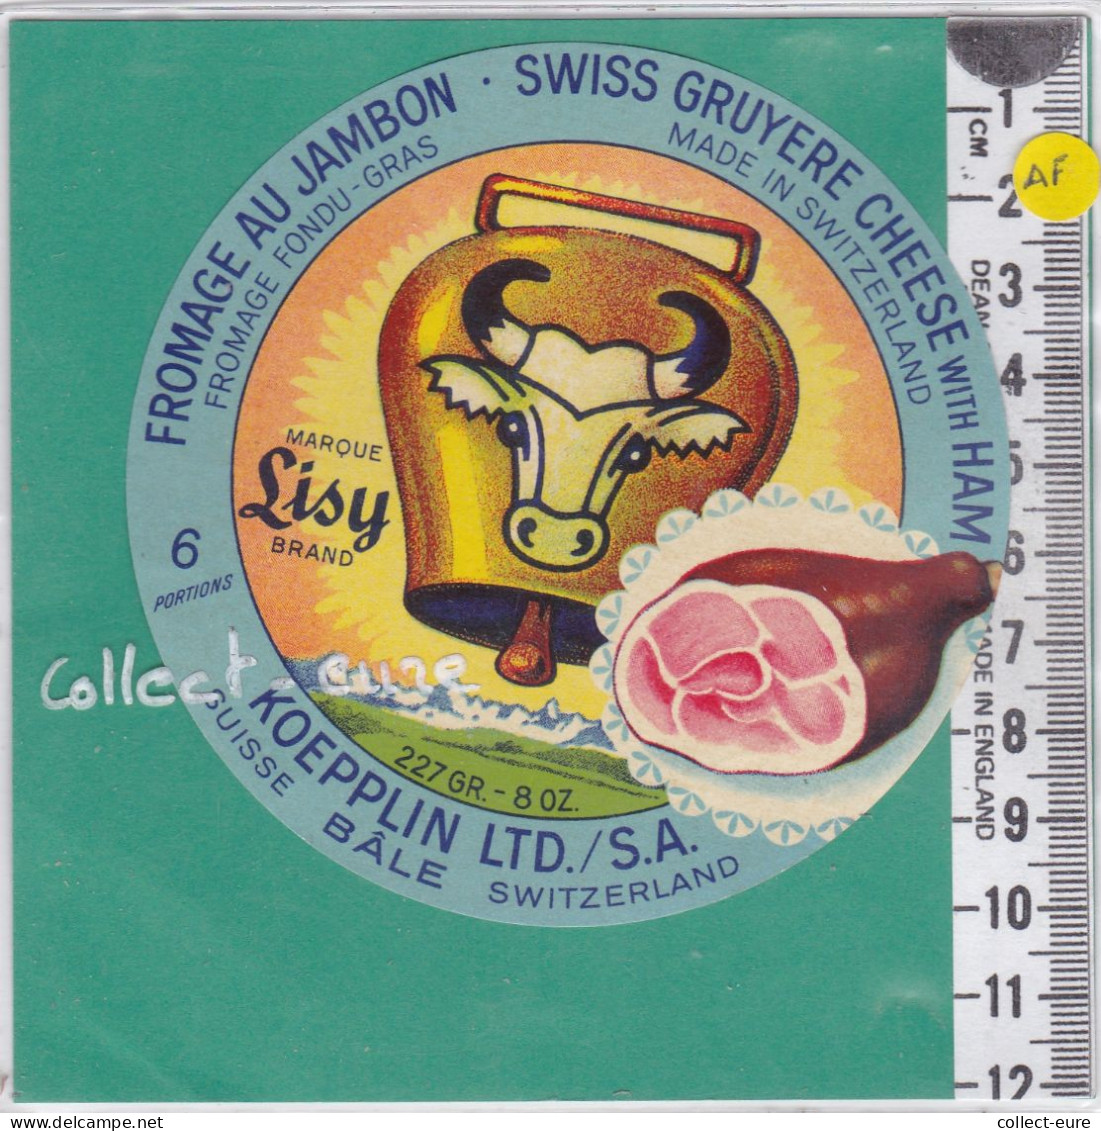 C1345 FROMAGE FONDU GRUYERE  LISY SUISSE BALE  6 PORTIONS CLOCHE JAMBON - Fromage